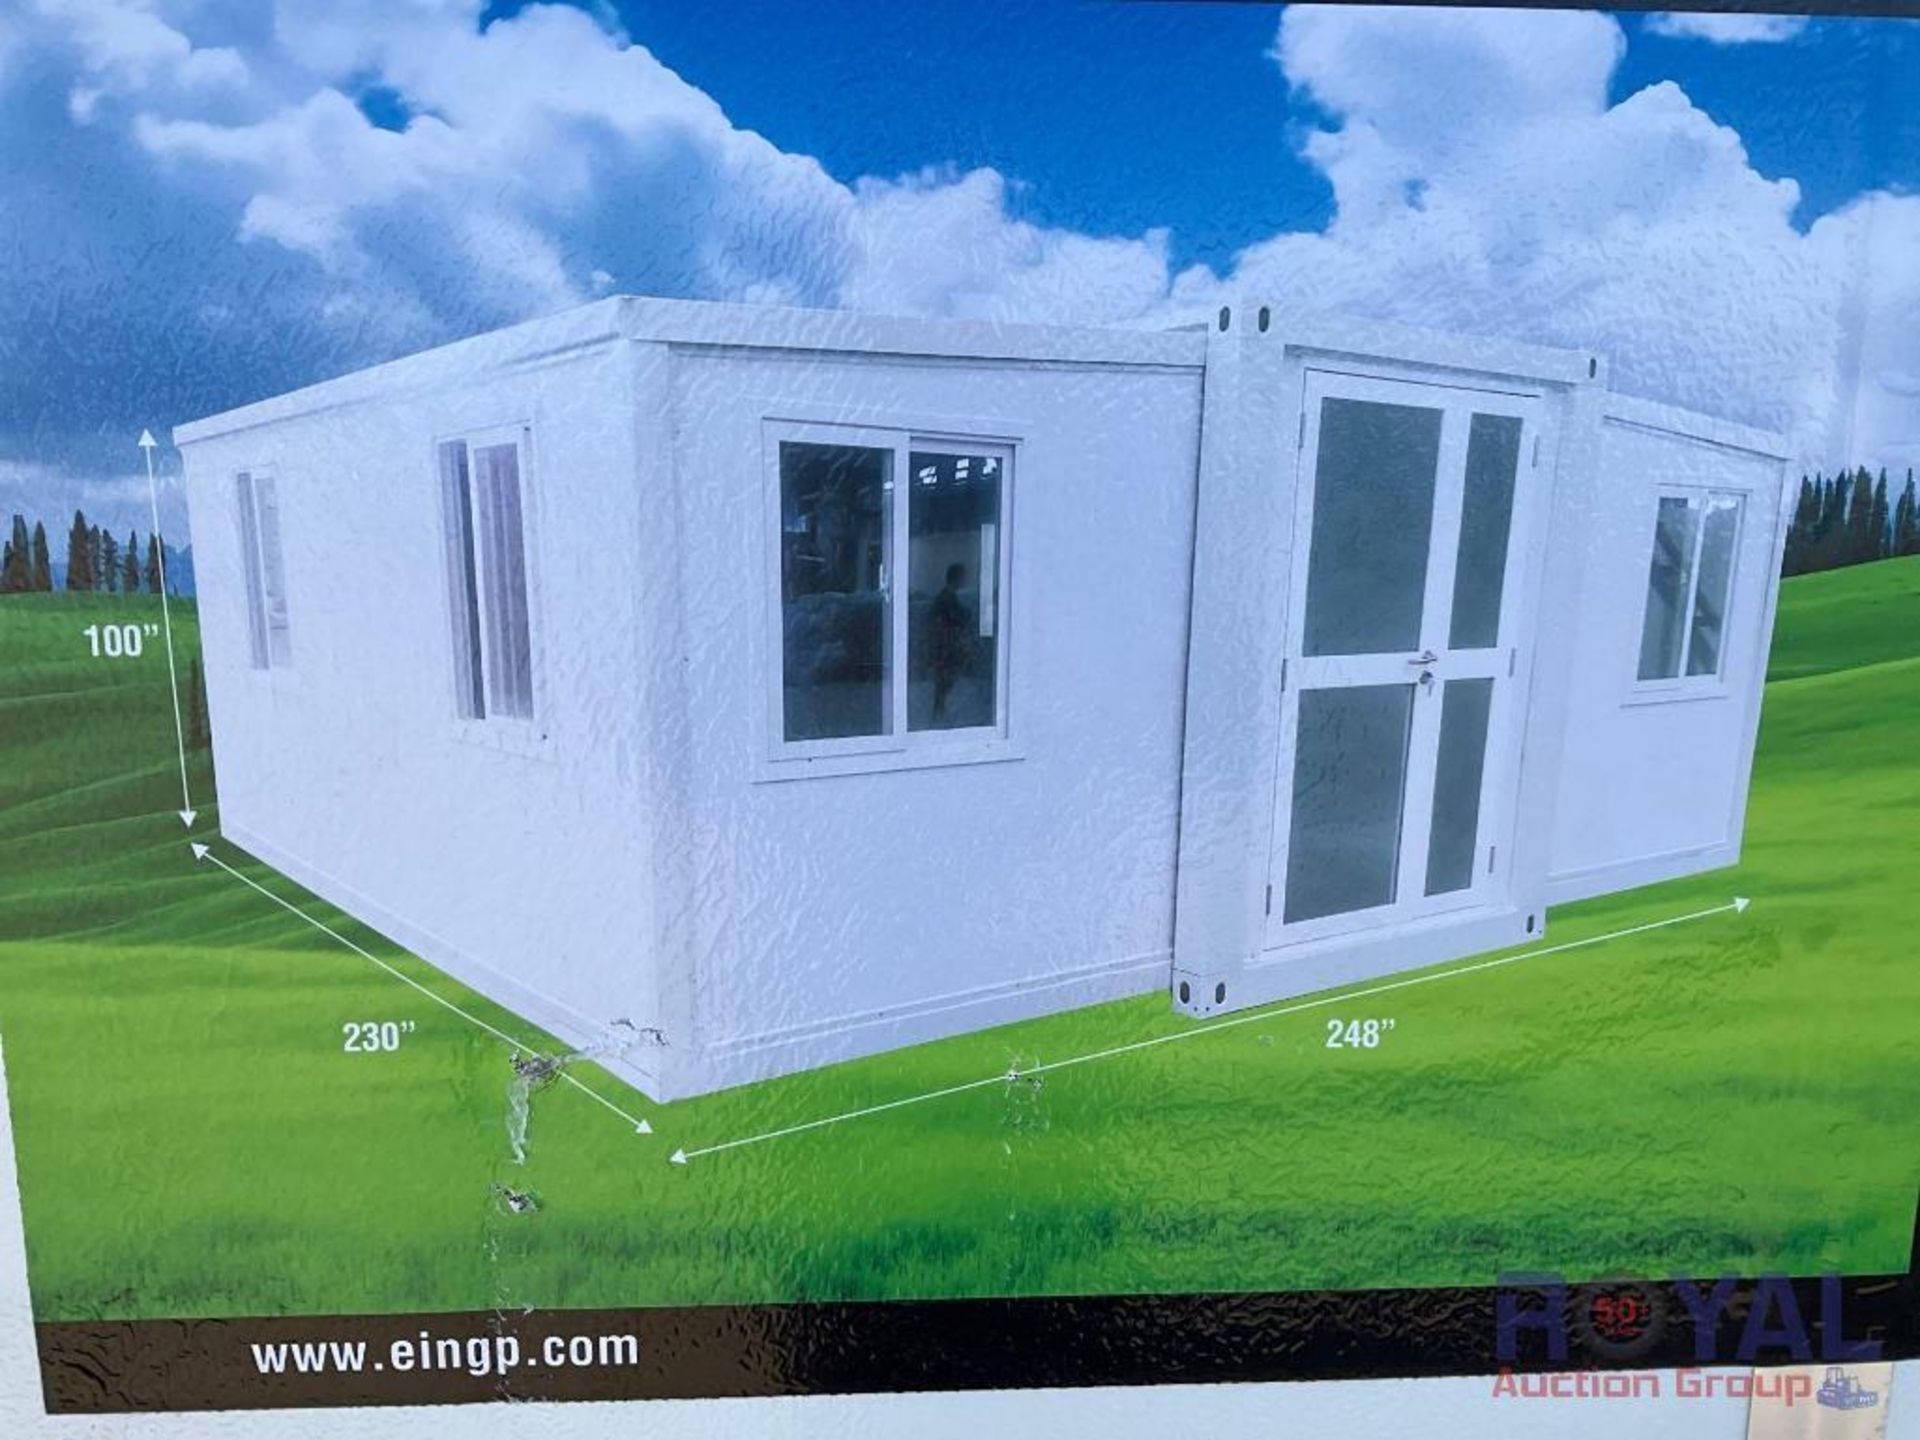 2024 400 Sqft Expandable Container Modular House - Image 6 of 10